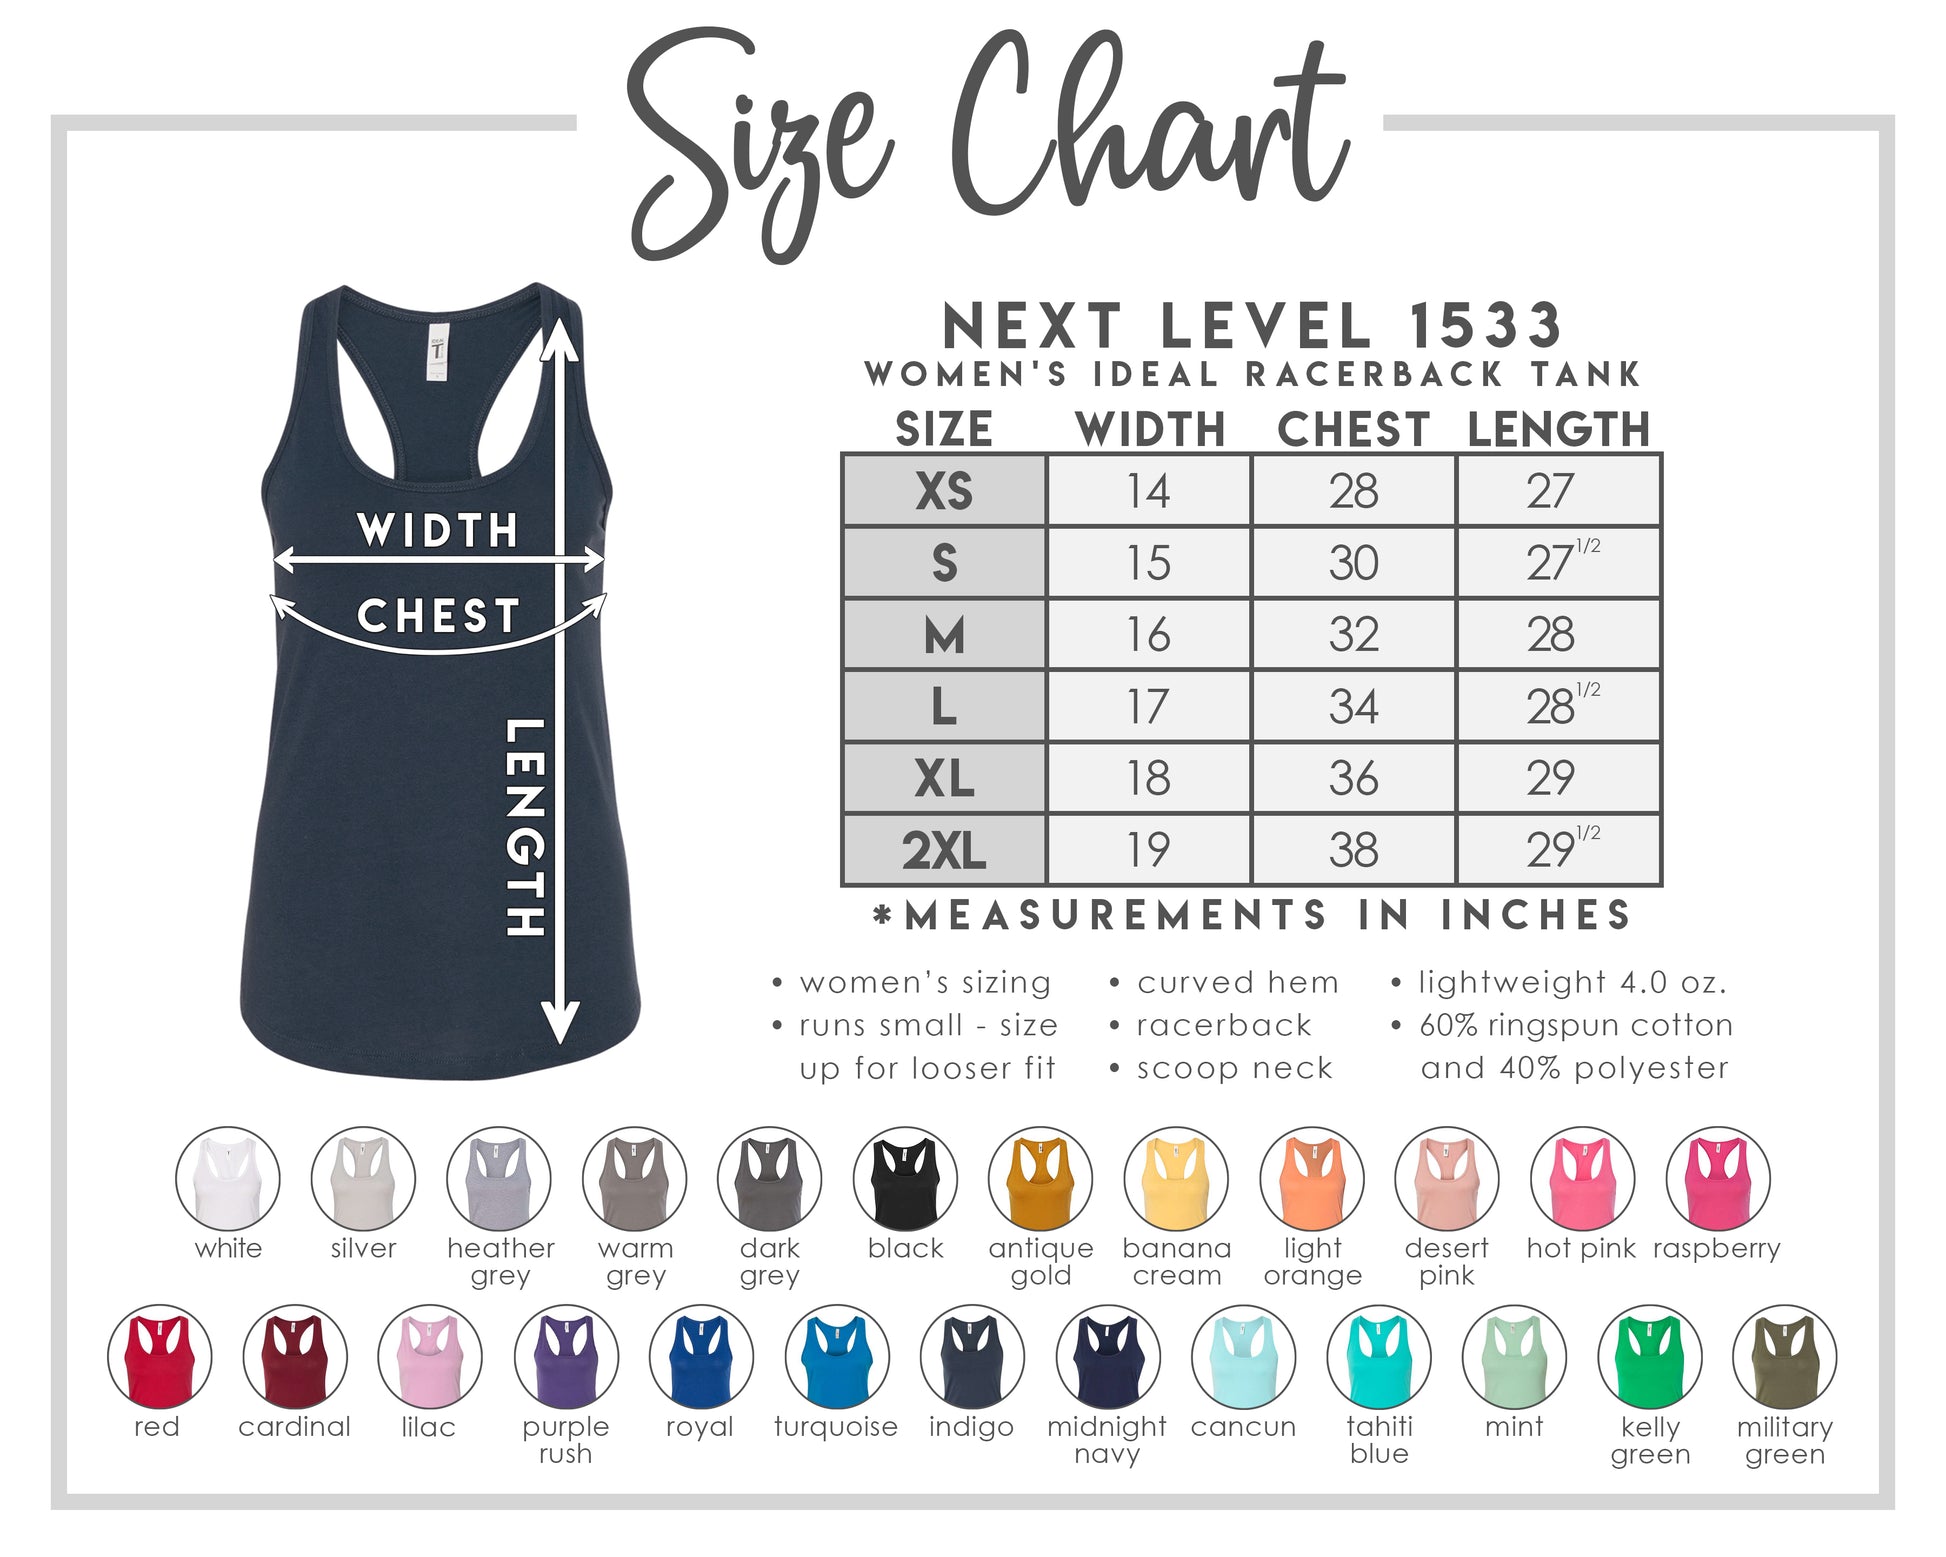 the size chart for a women's tank top